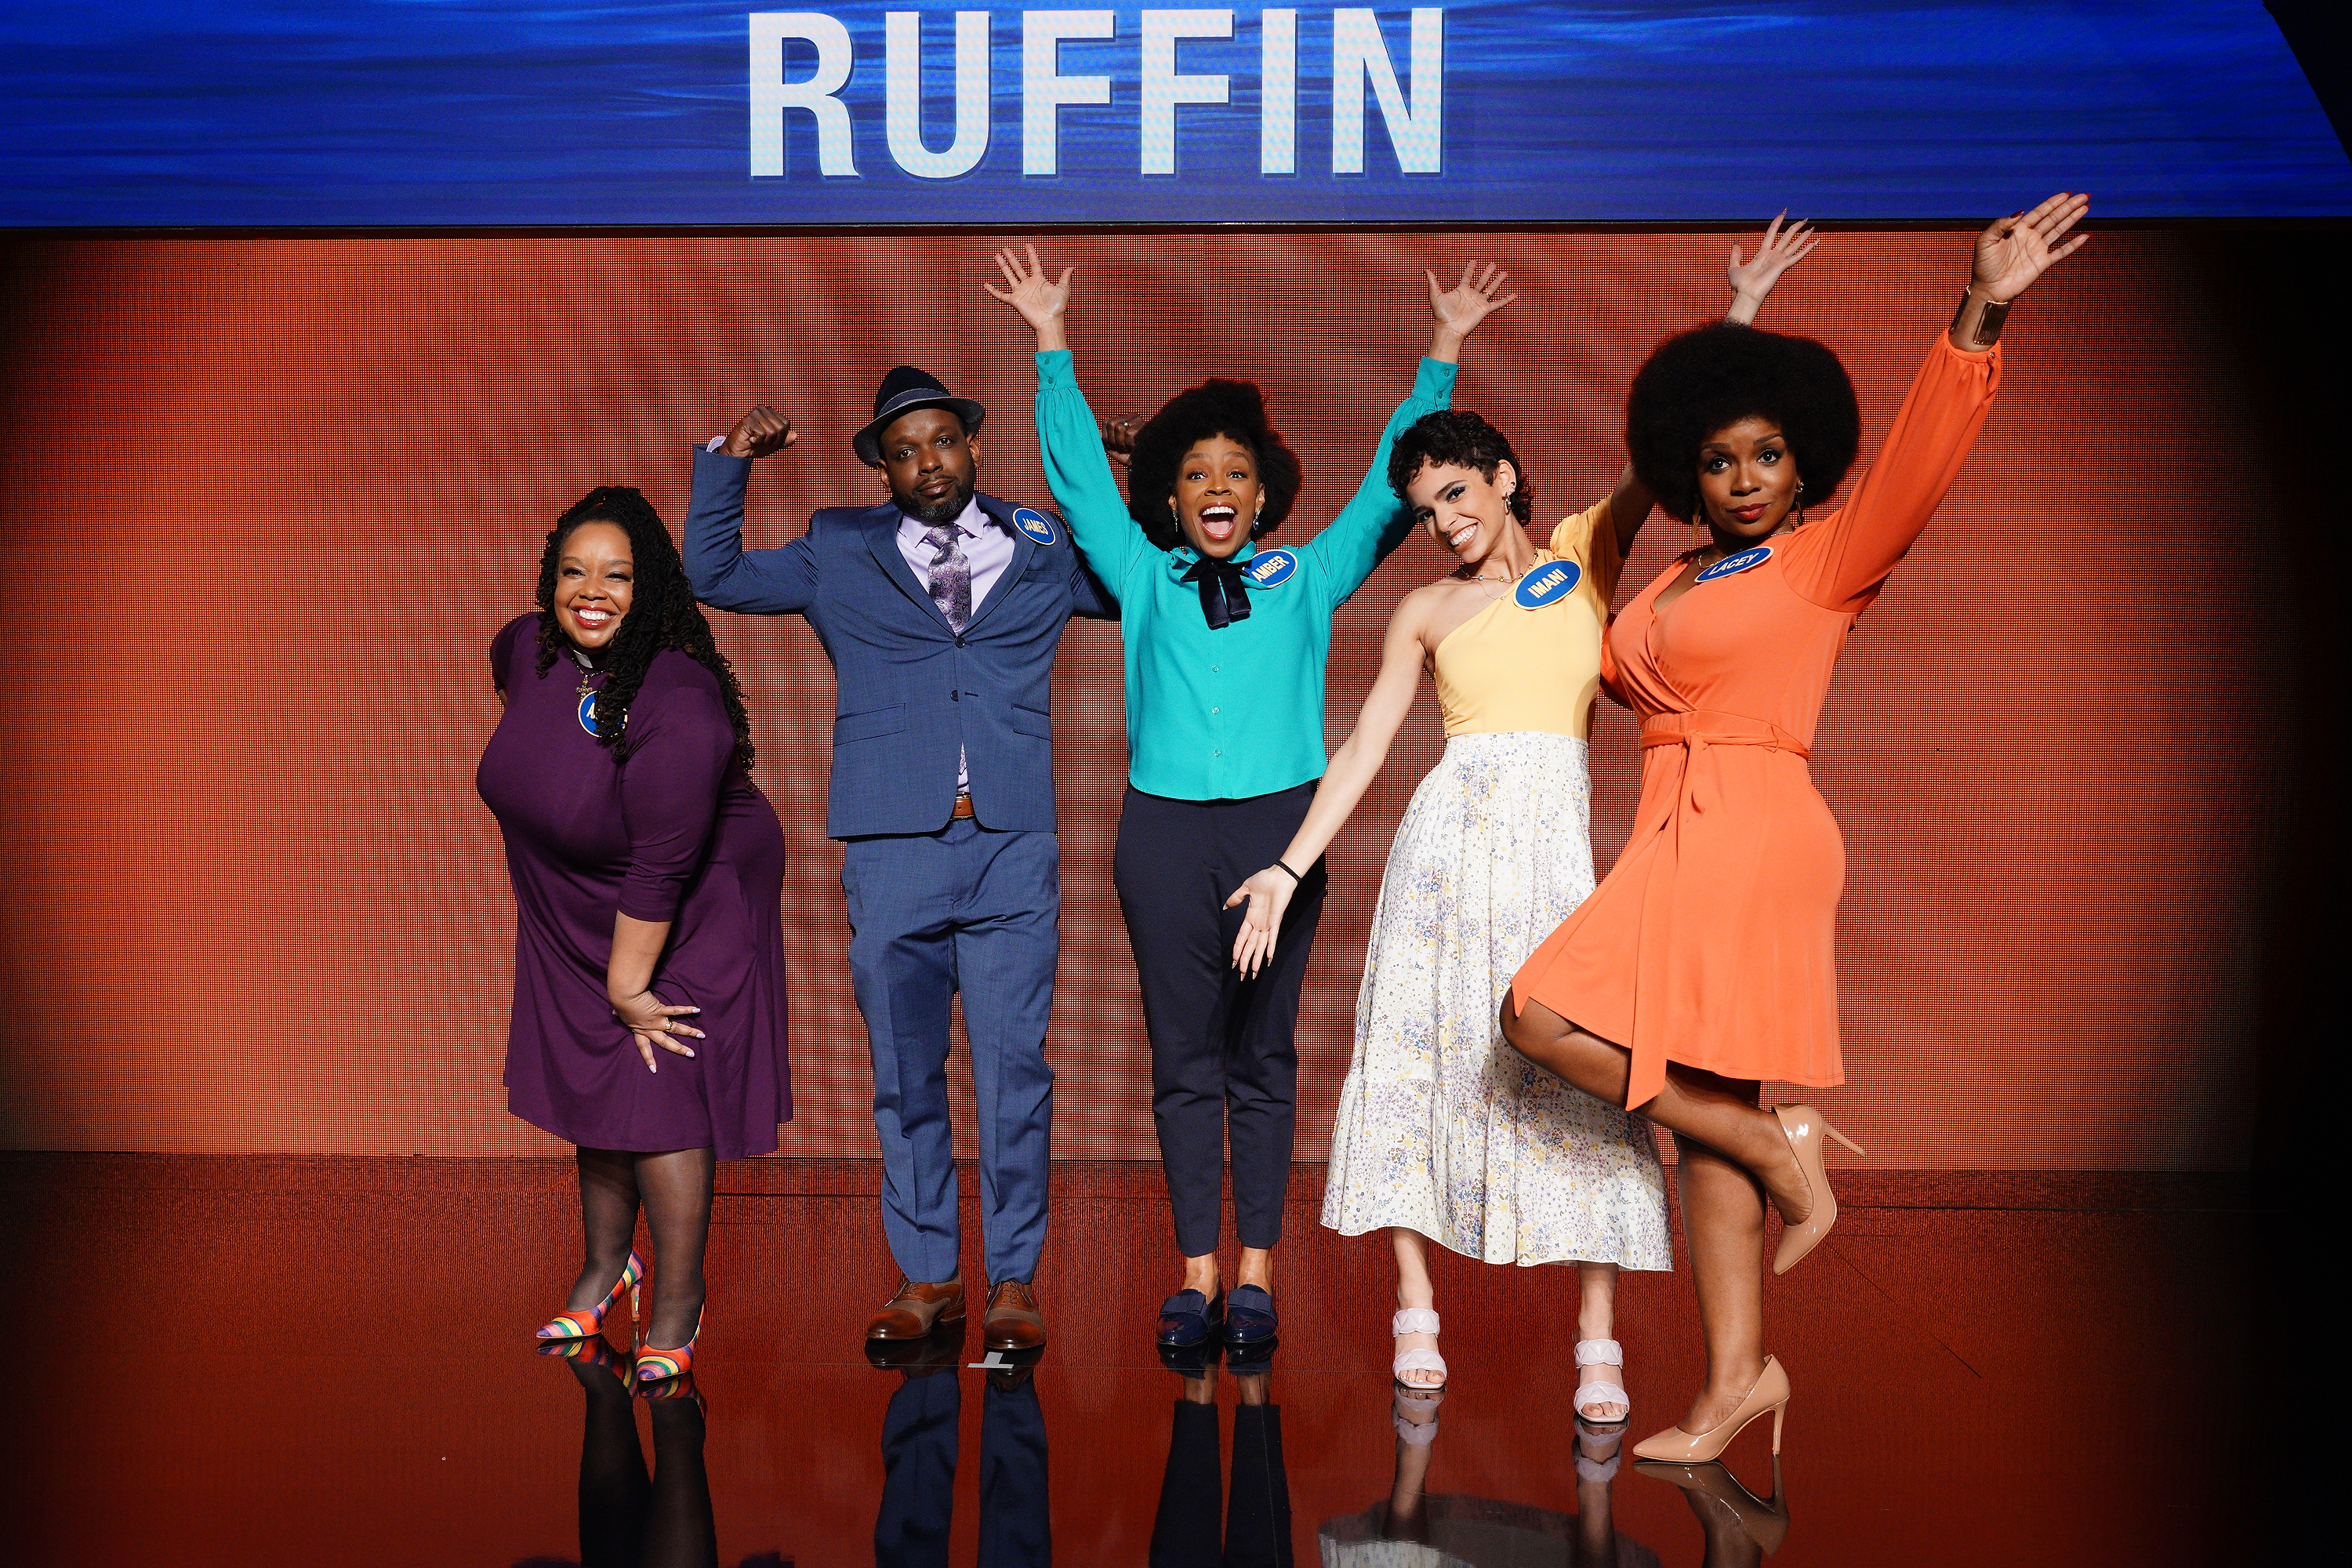 Celebrity Family Feud Amber Ruffin's family faces off against Boyz II Men